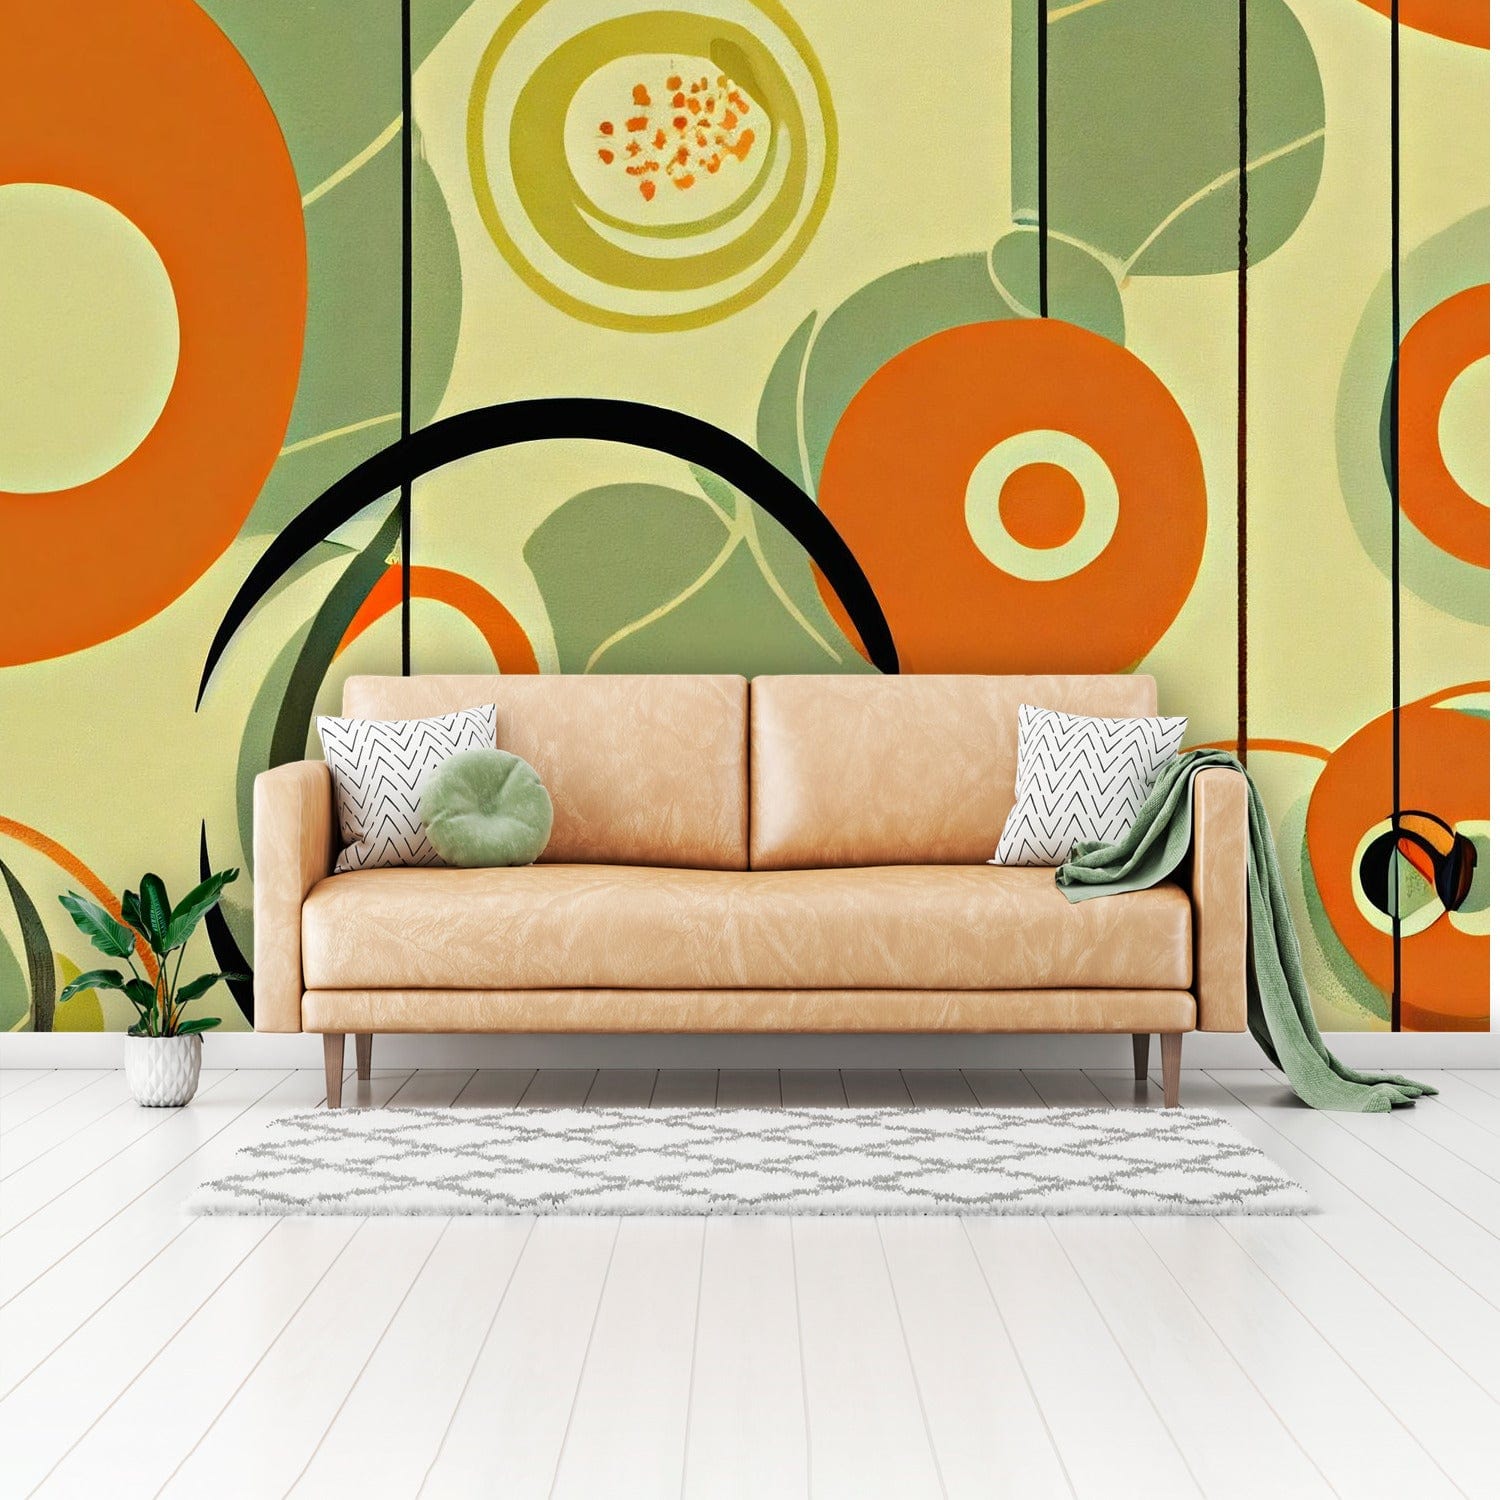 Mid Century Modern Wallpaper Groovy Green And Orange, Retro MCM Peel And Stick Wall Murals Wallpaper H110 x W160